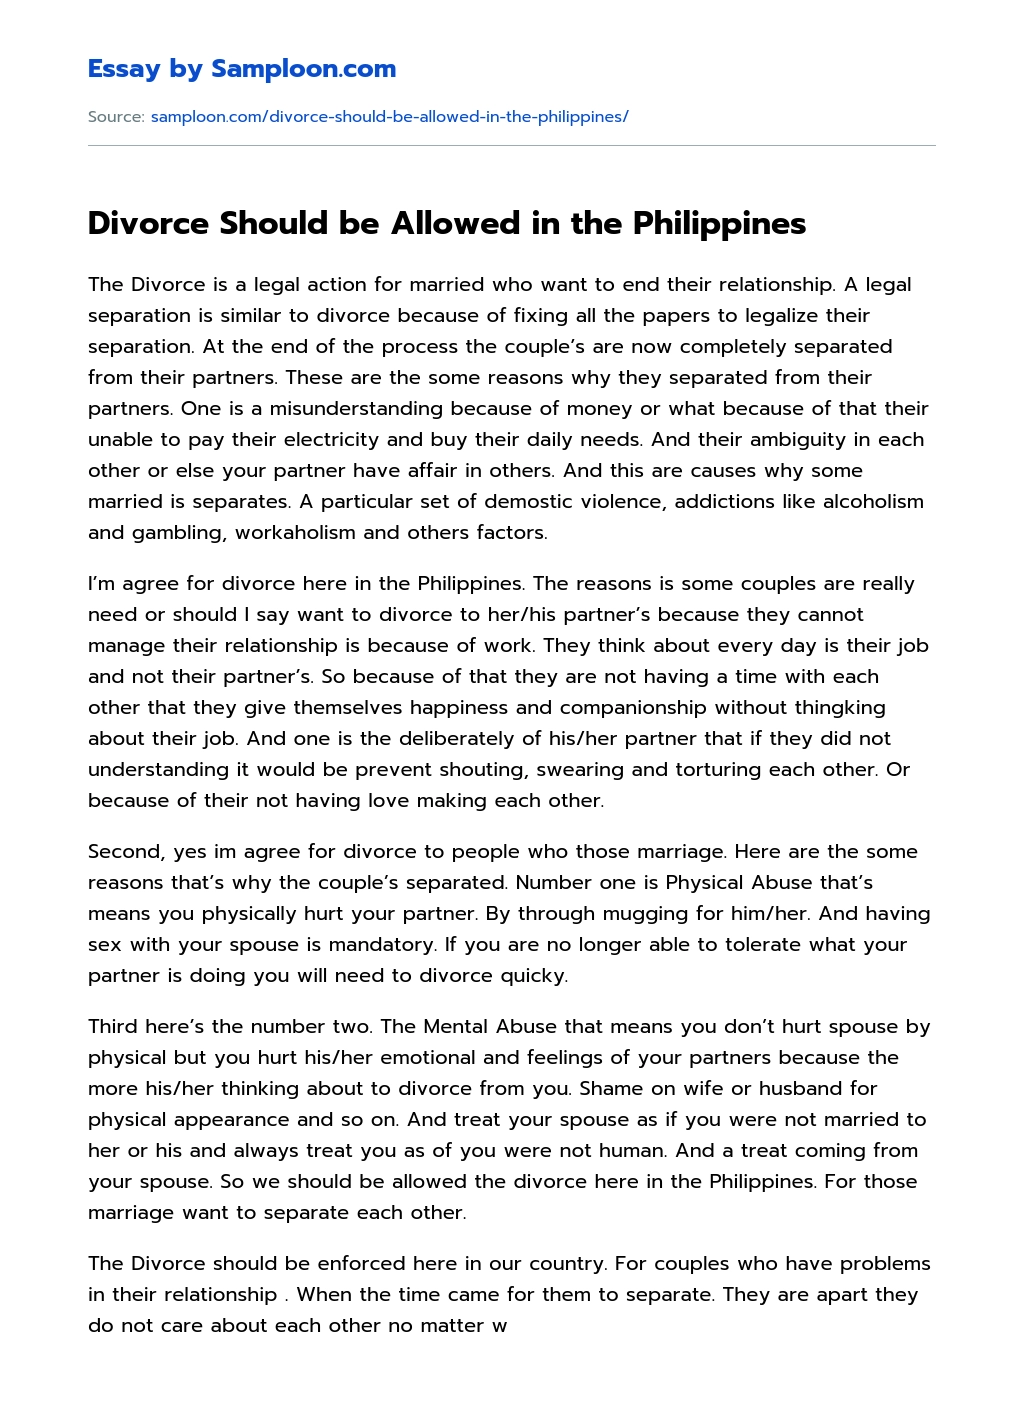 argumentative essay about divorce should be legalized in the philippines